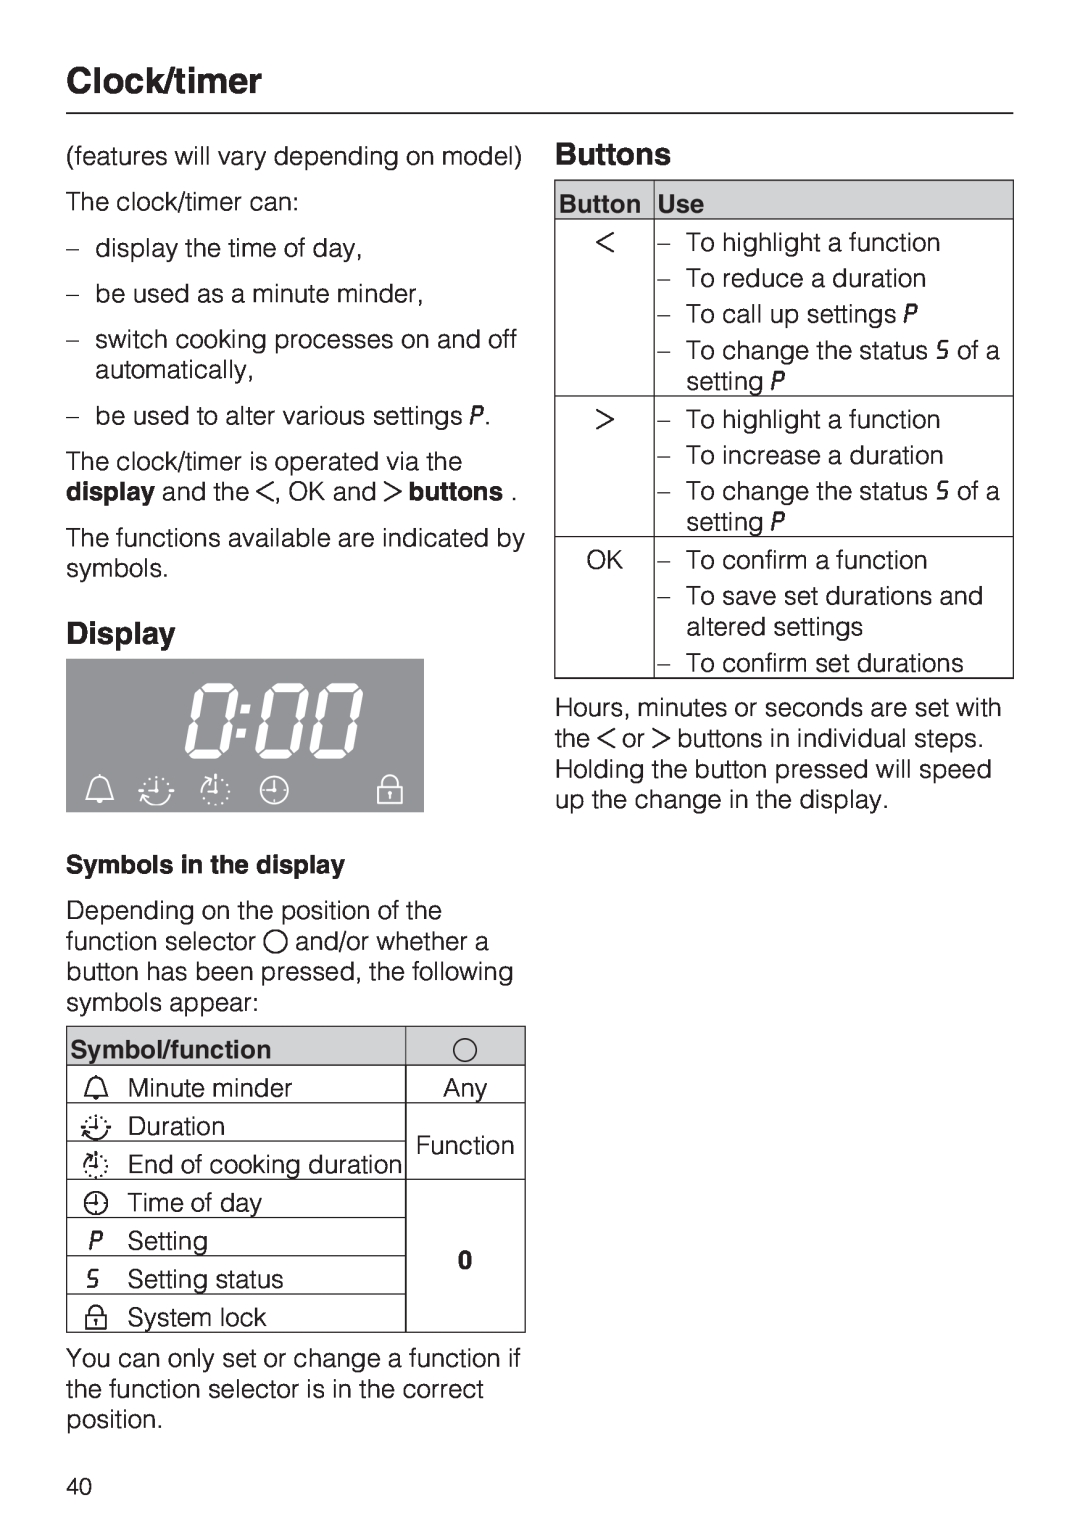 Miele 10 102 470 installation instructions 0:00, Clock/timer, Display, Buttons, Symbols in the display, Symbol/function 